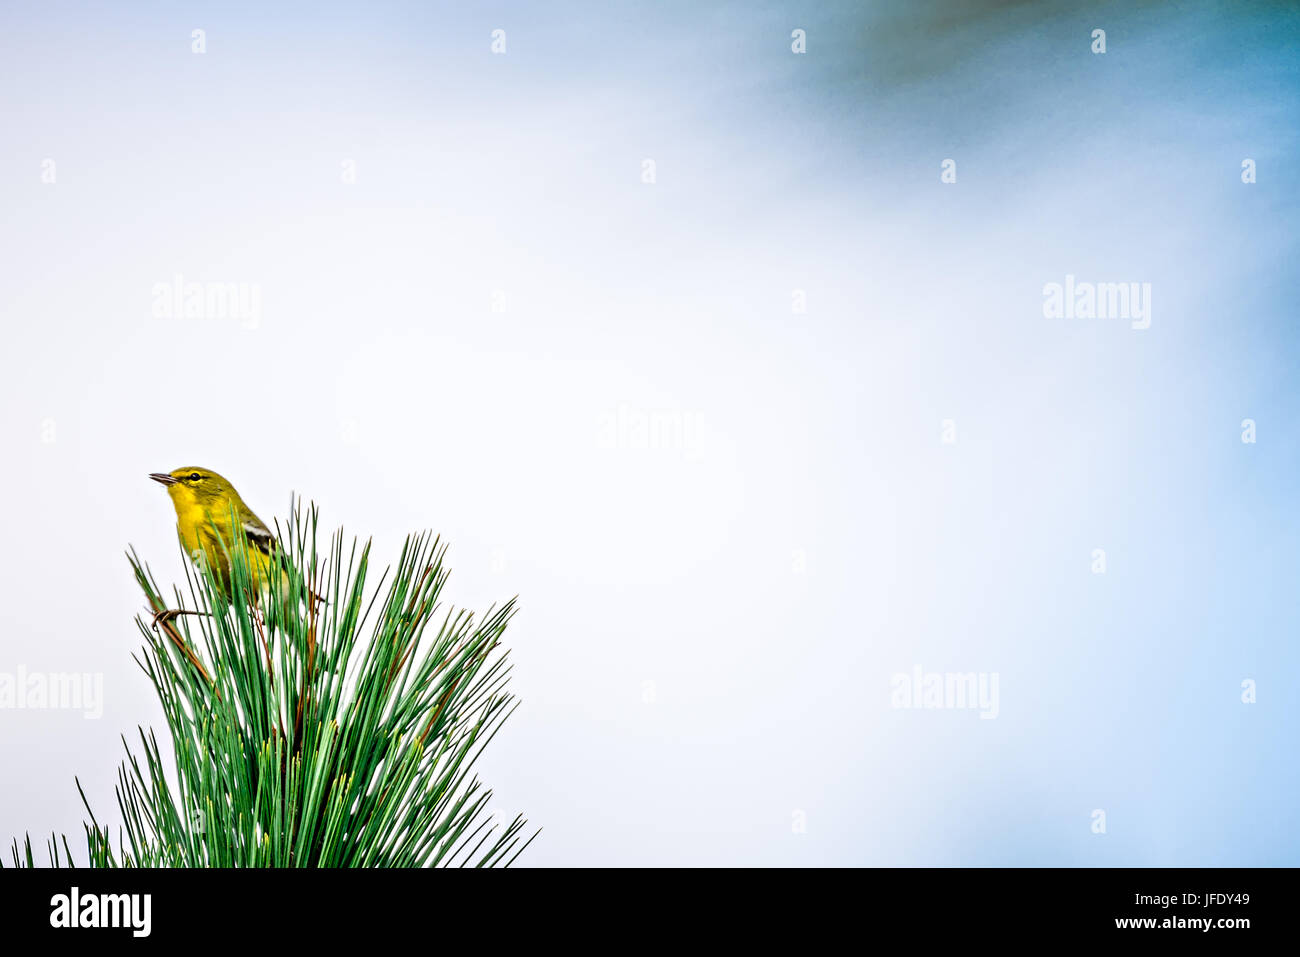 tiny bird perched on top of evergreen tree Stock Photo